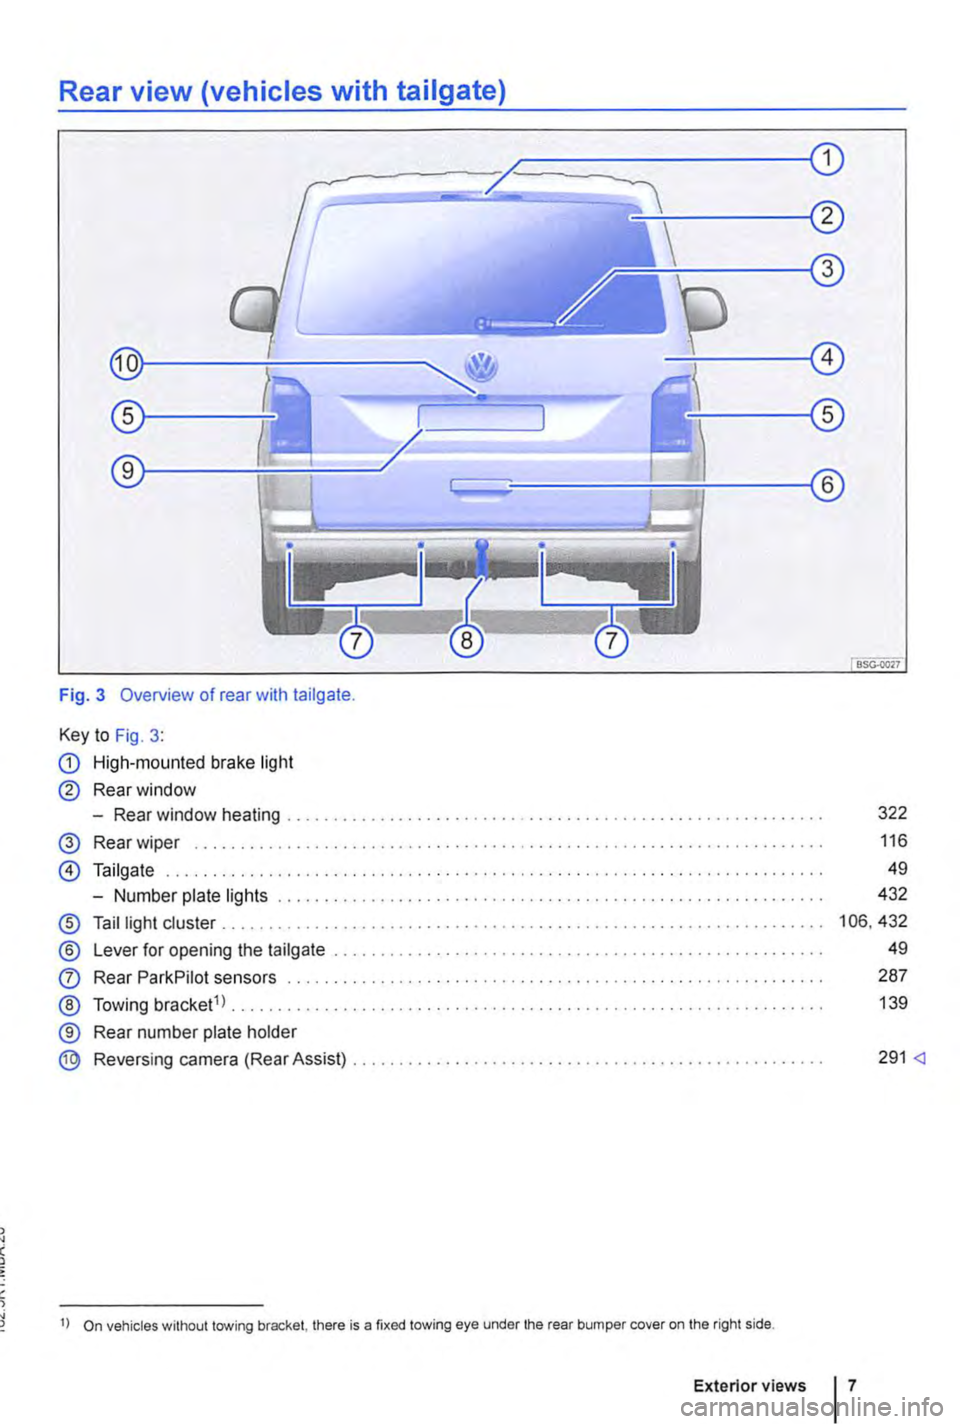 VOLKSWAGEN TRANSPORTER 2019  Owners Manual Rear view (vehicles with tailgate) 
Fig. 3 Overview of rear with tailgate. 
Key to Fig. 3: 
CD High-mounted brake light 
@ Rear window 
-Rear window heating ........................ . 
@ Rear wiper ..